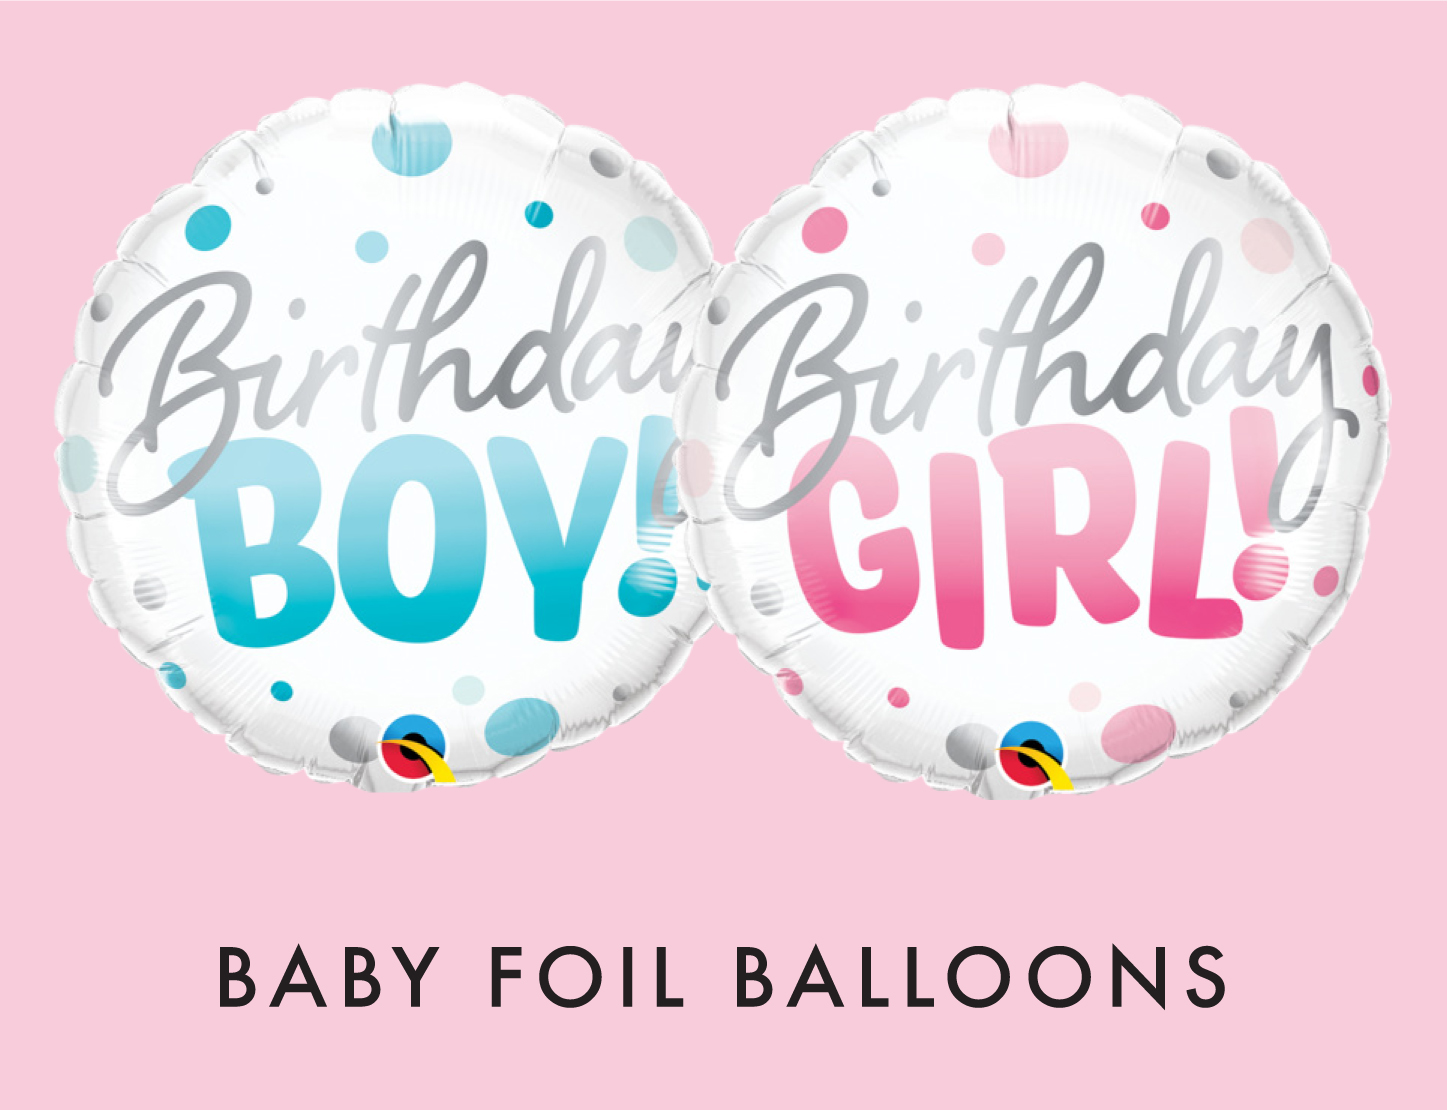 Baby Foil Balloons